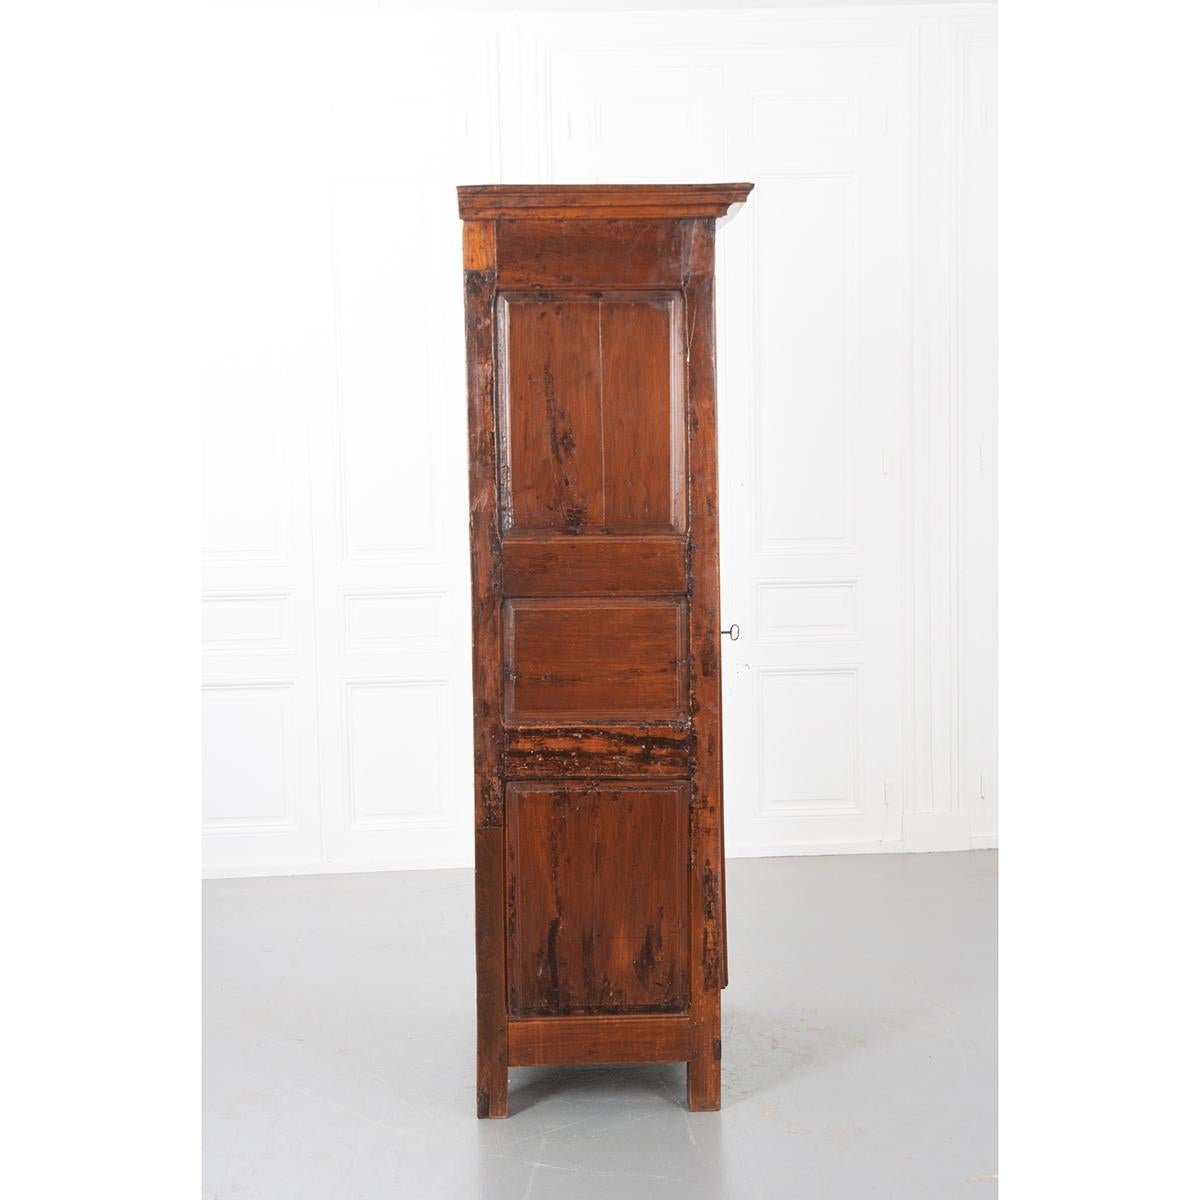 Gorgeous walnut bonnetiere with a geometric carved and paneled door on barrel hinges. All hand-pegged construction with original hardware. A single key works the lock and acts as the pull. Each side is comprised of three raised panels. The interior